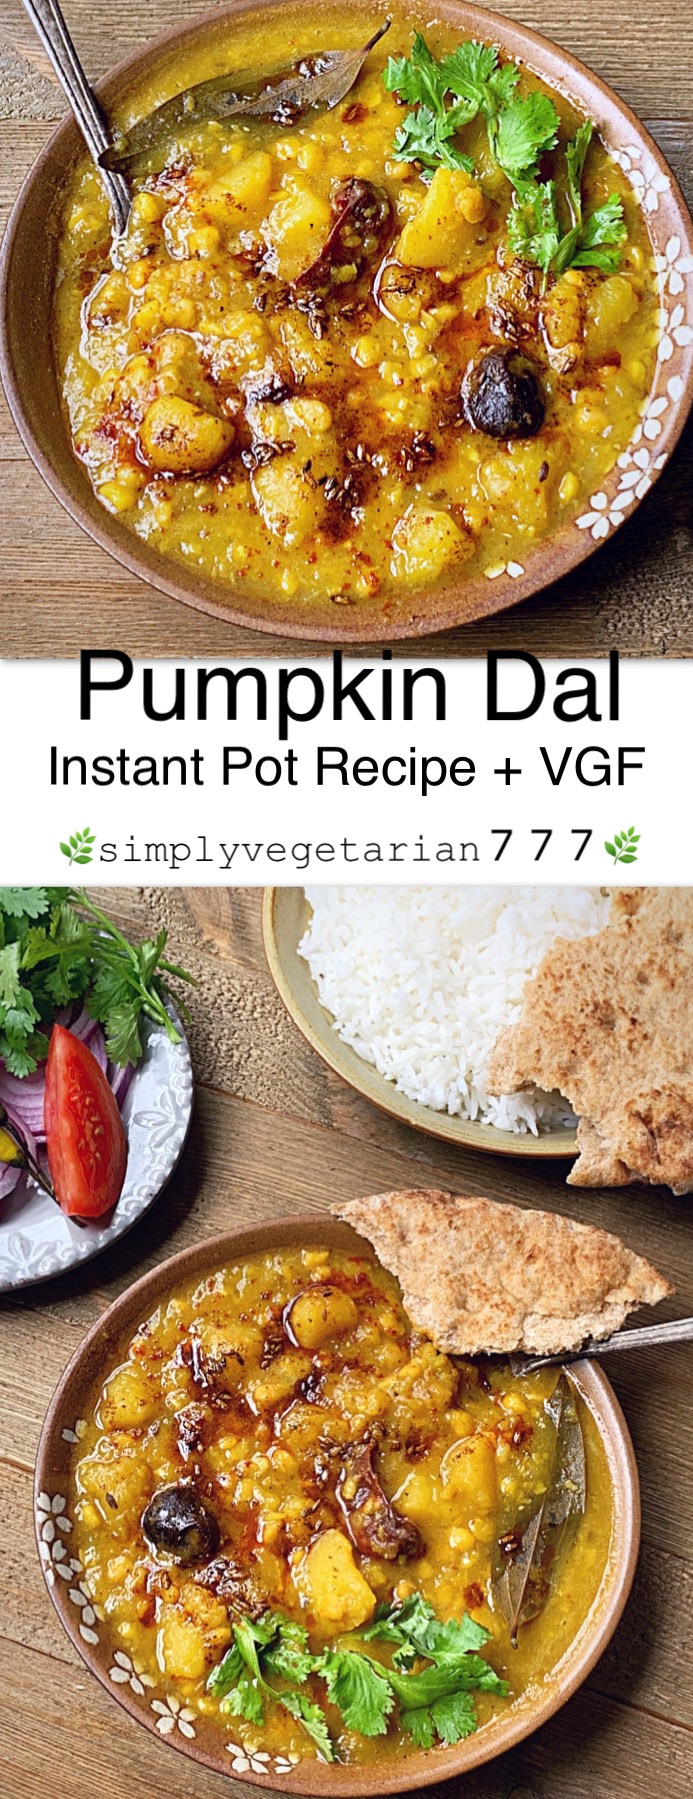 Instant Pot Pumpkin Dal is super delicious and is nutritious as well. It is super simple to make it in the Instant Pot. This Dal is best enjoyed warm with hot naan or rice. #dal #dhal #pumpkin #fallrecipes #veganpumpkin #instantpotvegetarian